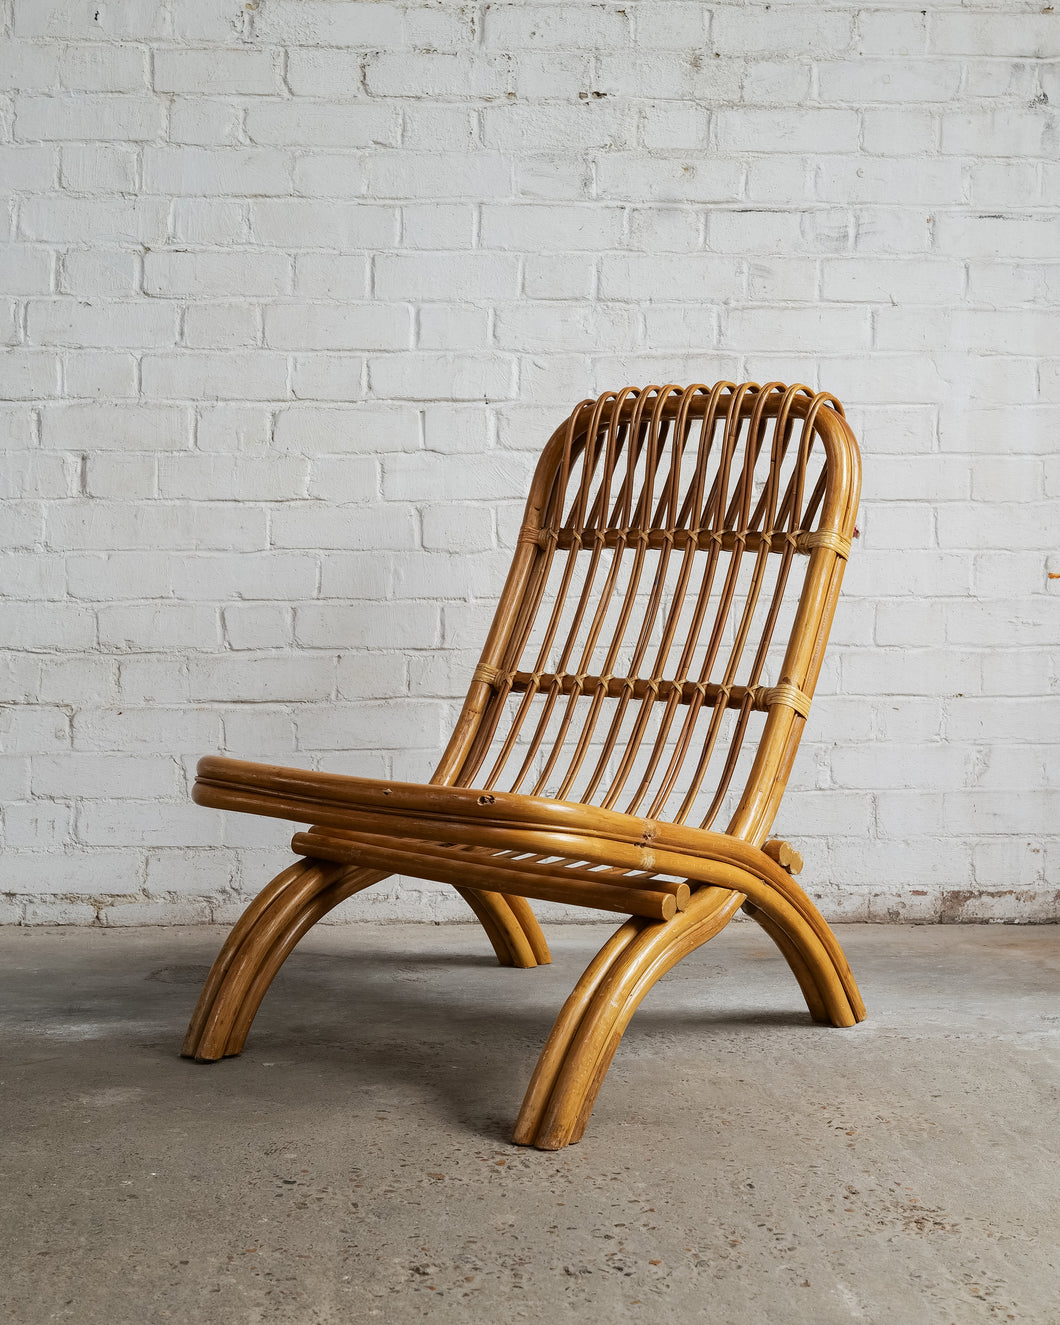 French Bamboo Folding Chair In The Manor Of Fanco Albini